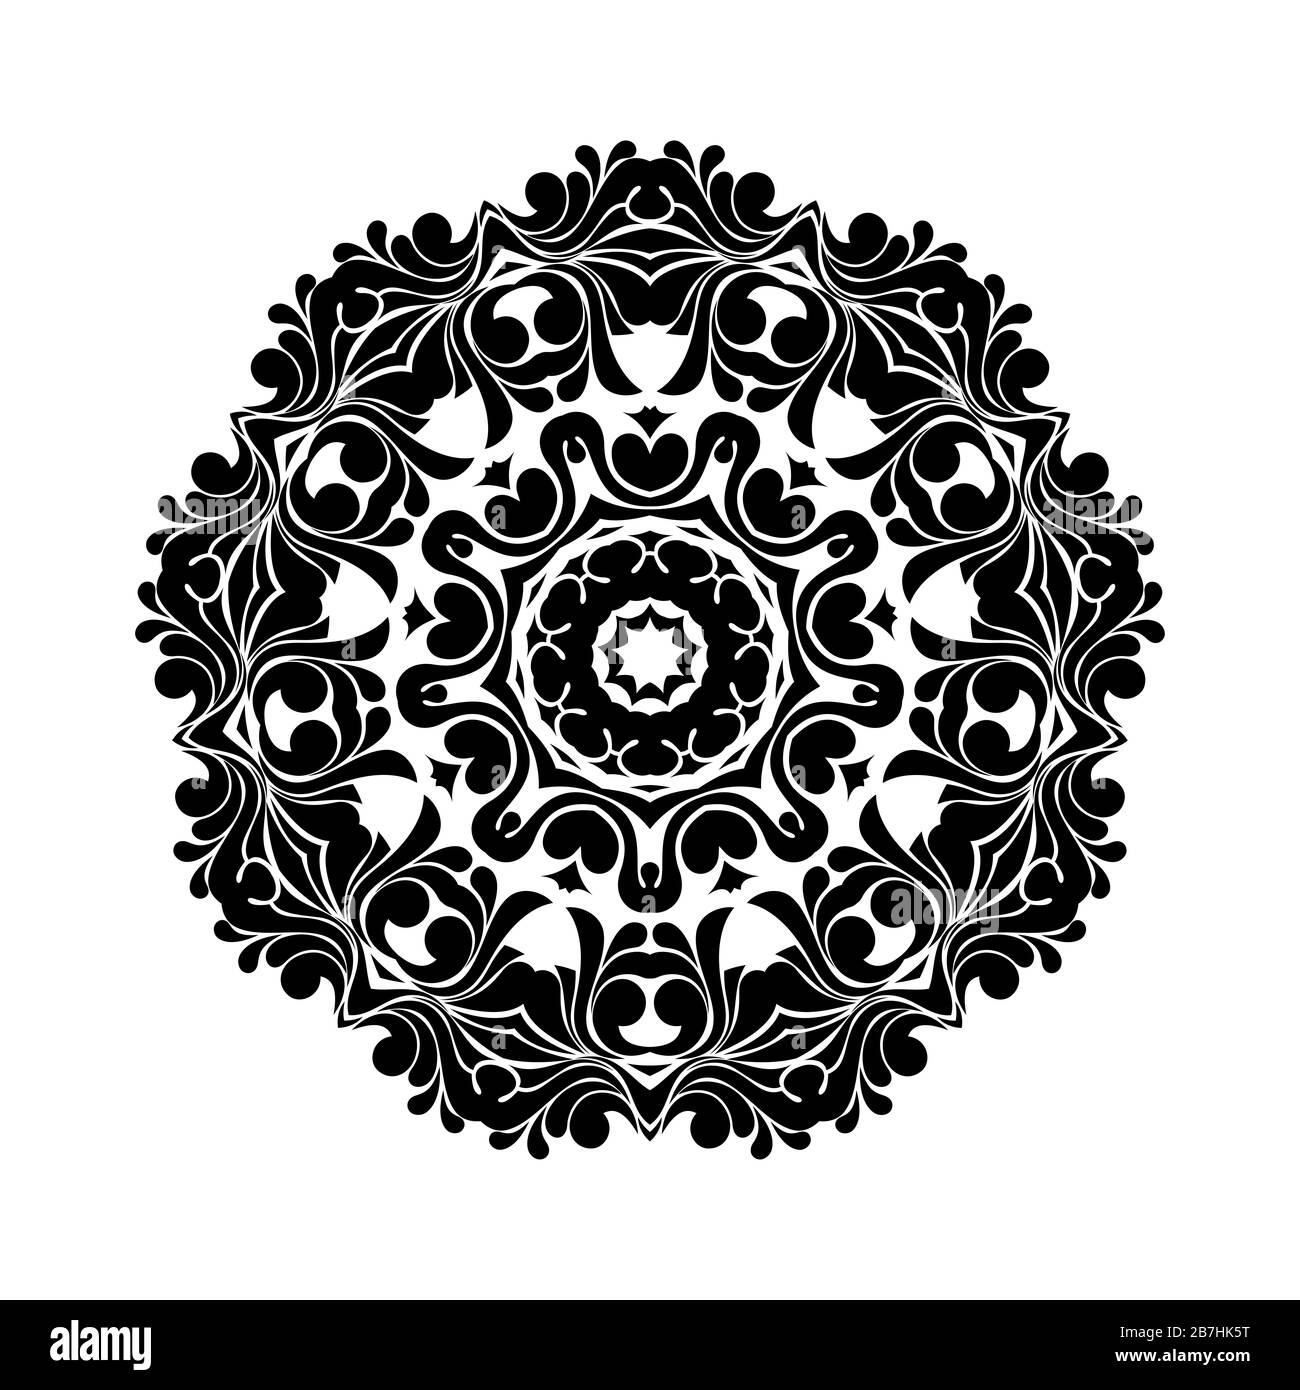 Round black mandala on white isolated background. Decorative ornament in ethnic oriental style. Perfect for any design, birthday, holiday, kaleidoscop Stock Photo